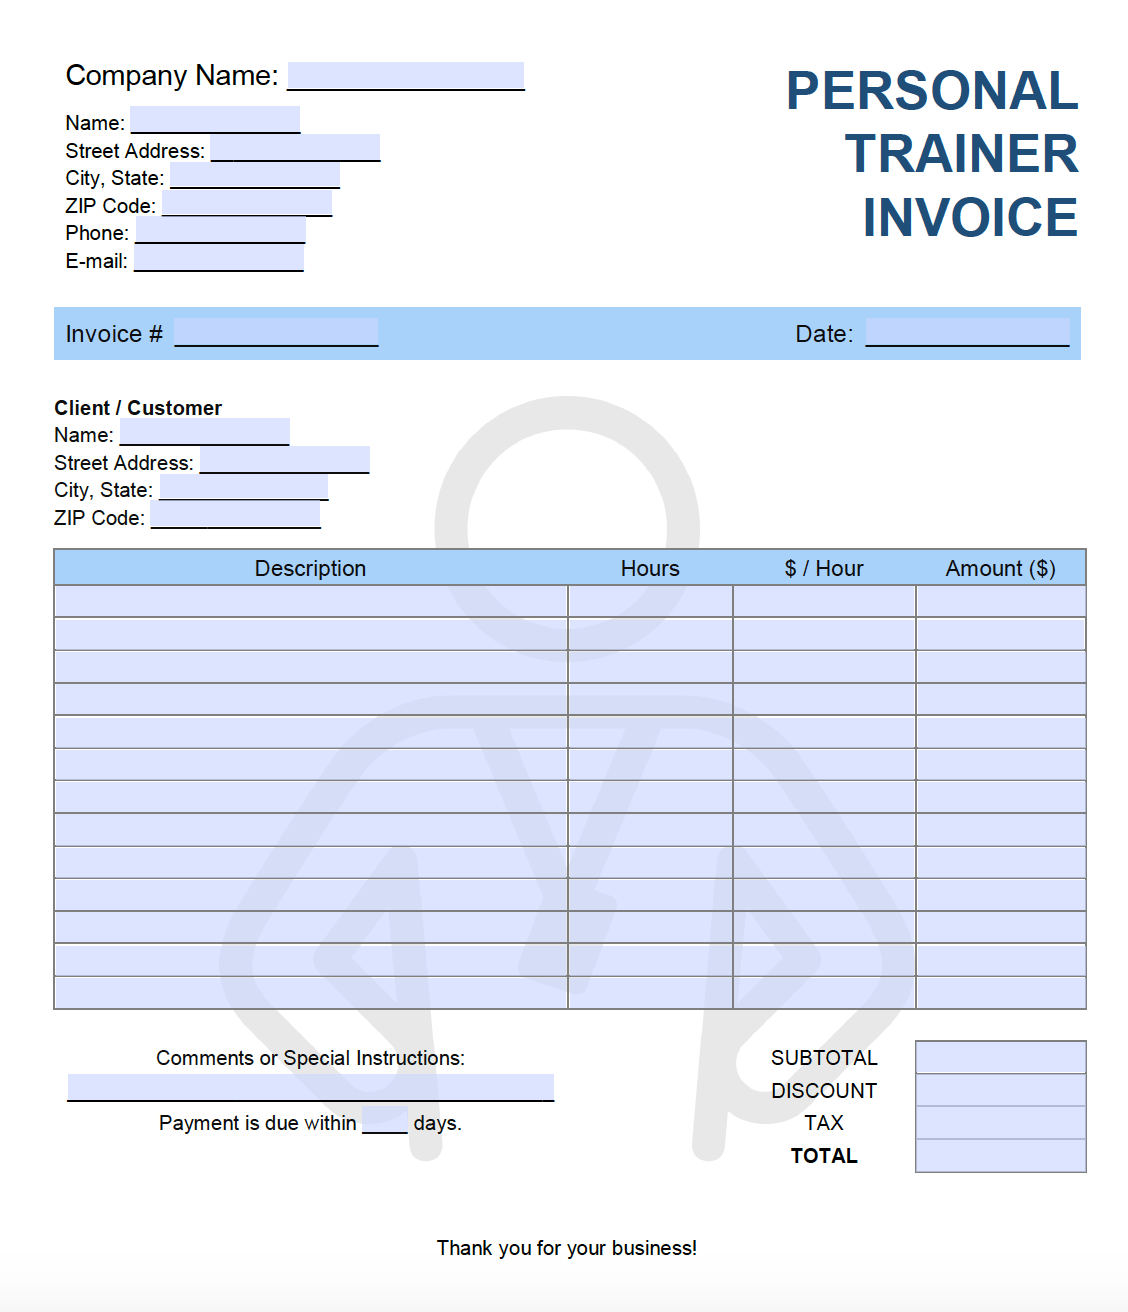 Personal Trainer Invoice Template